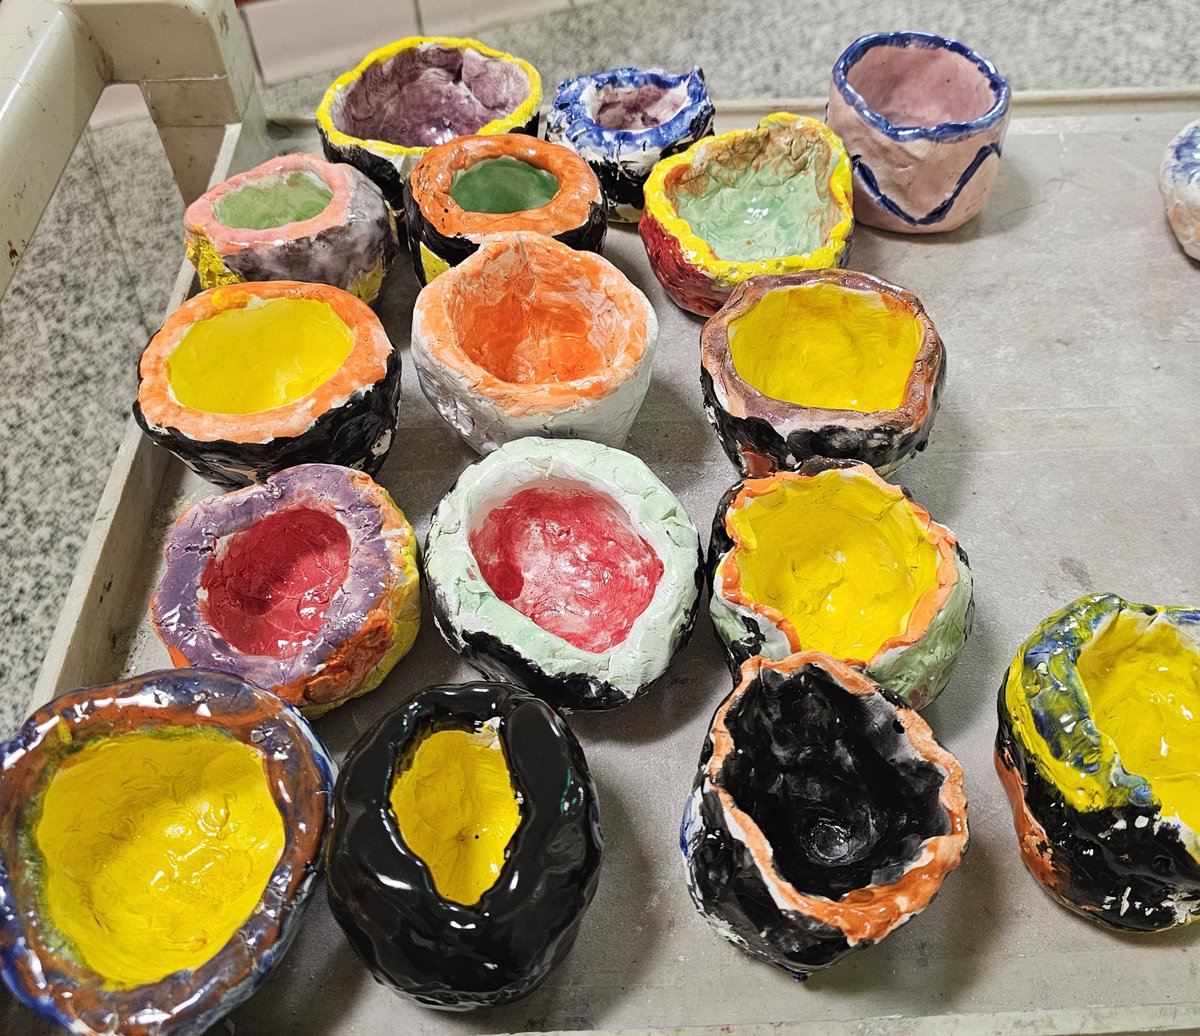 Kindergarten enjoyed exploring forming clay into pots and using the glaze to add colors and patterns. @flesbcps